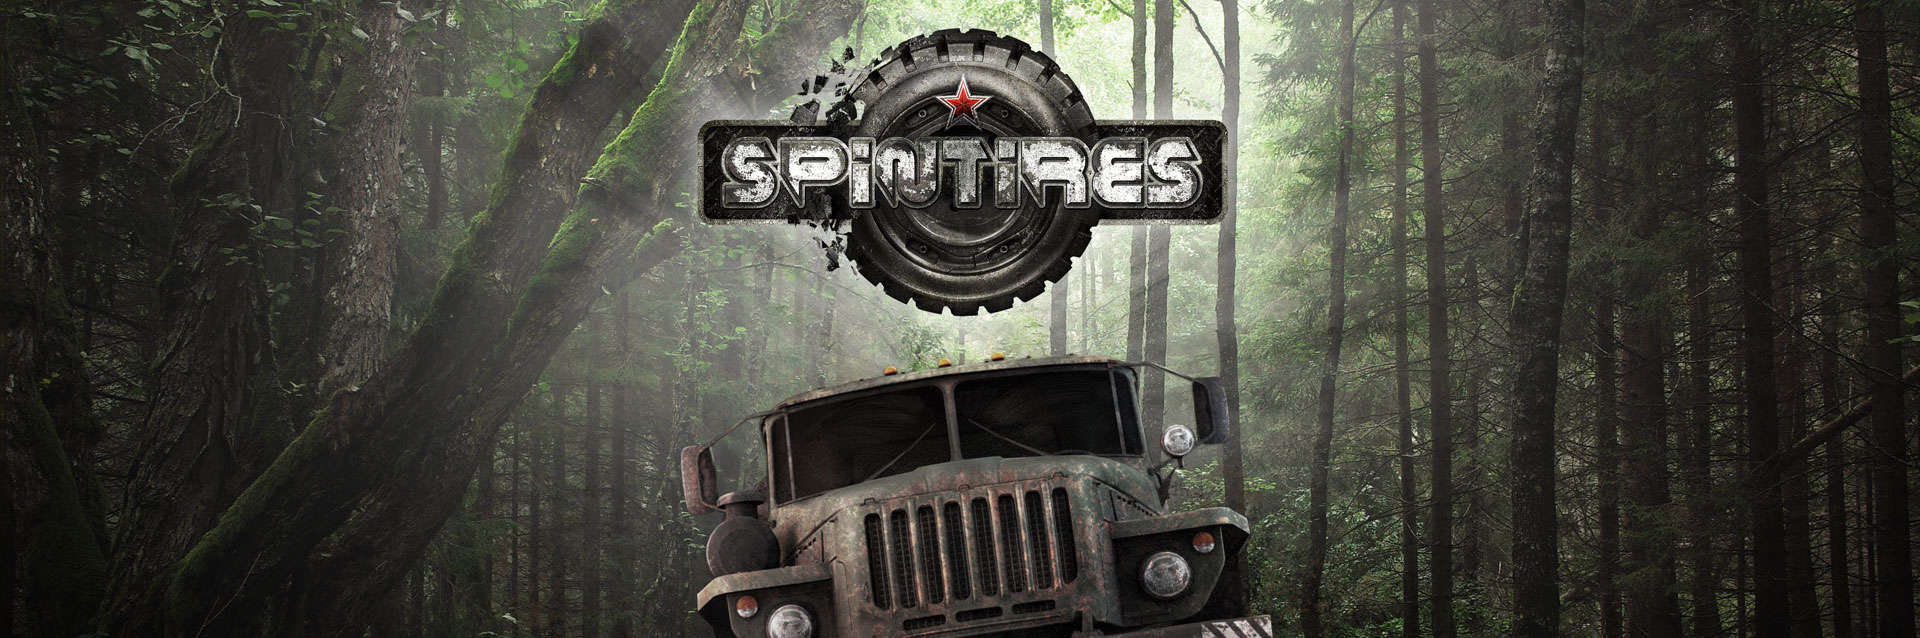 Spintires System Requirements Spintires Recommended Requirements.